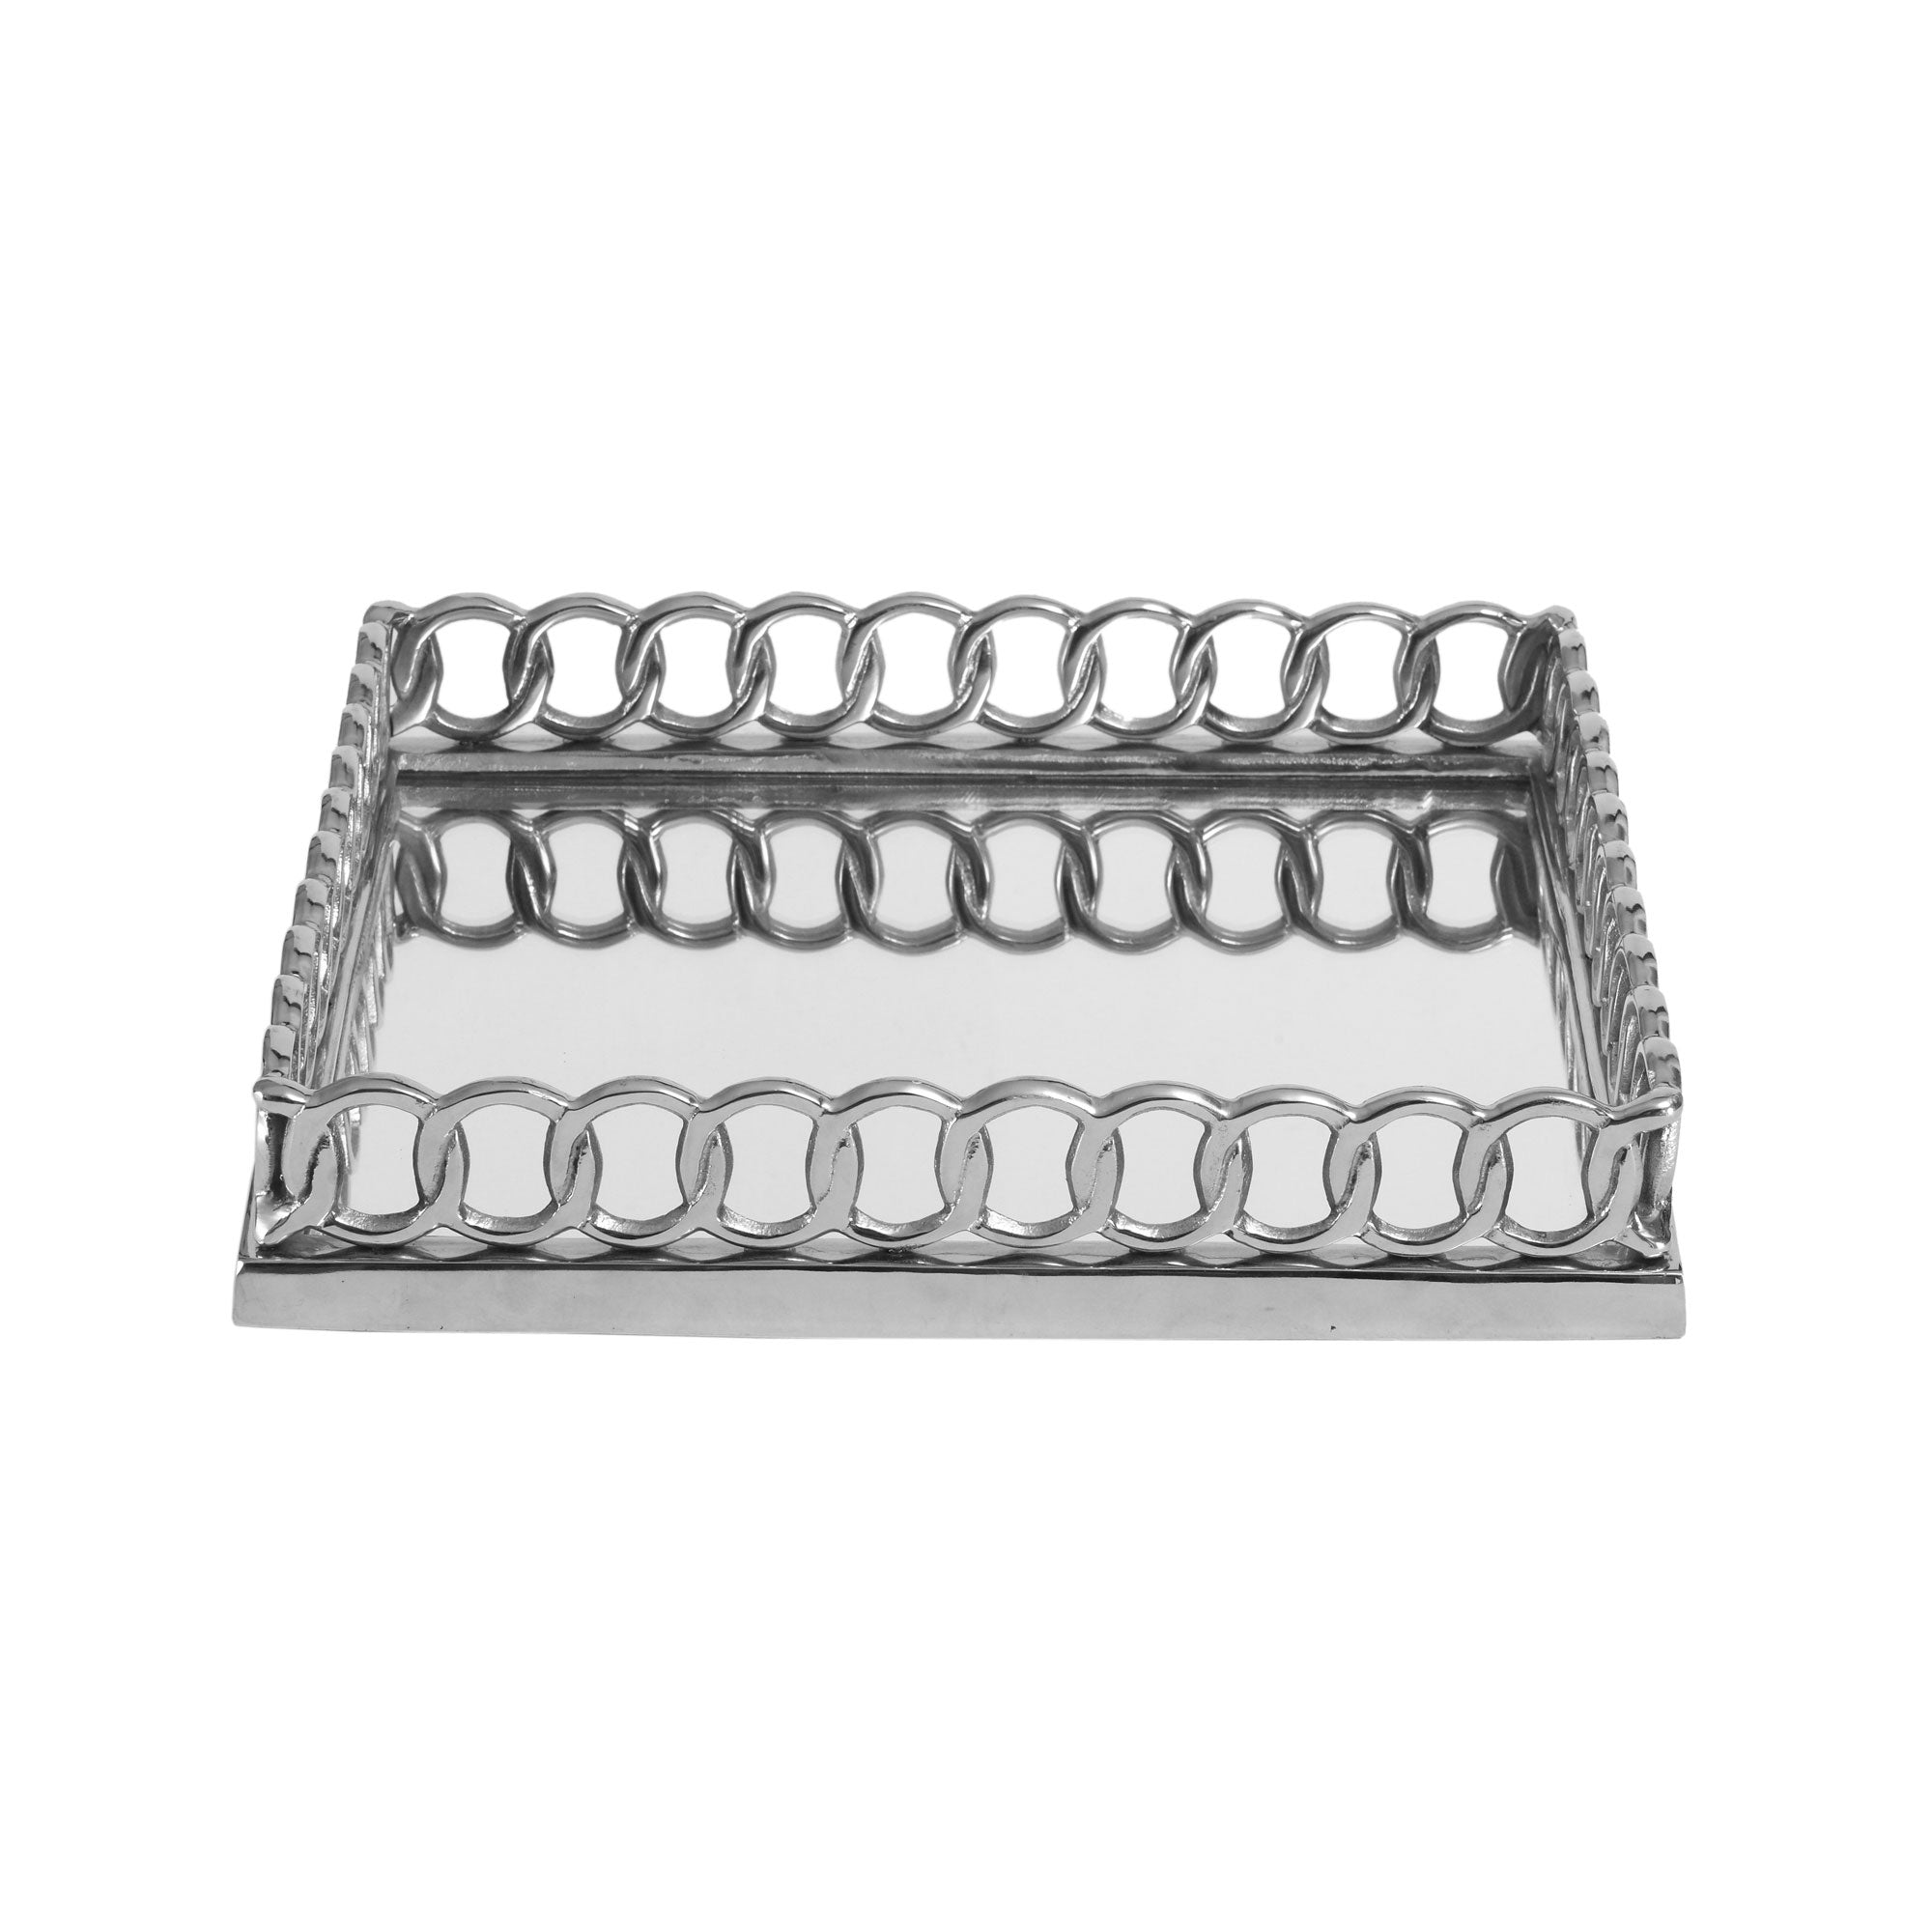 Chain Link Tray - Mirrored Large